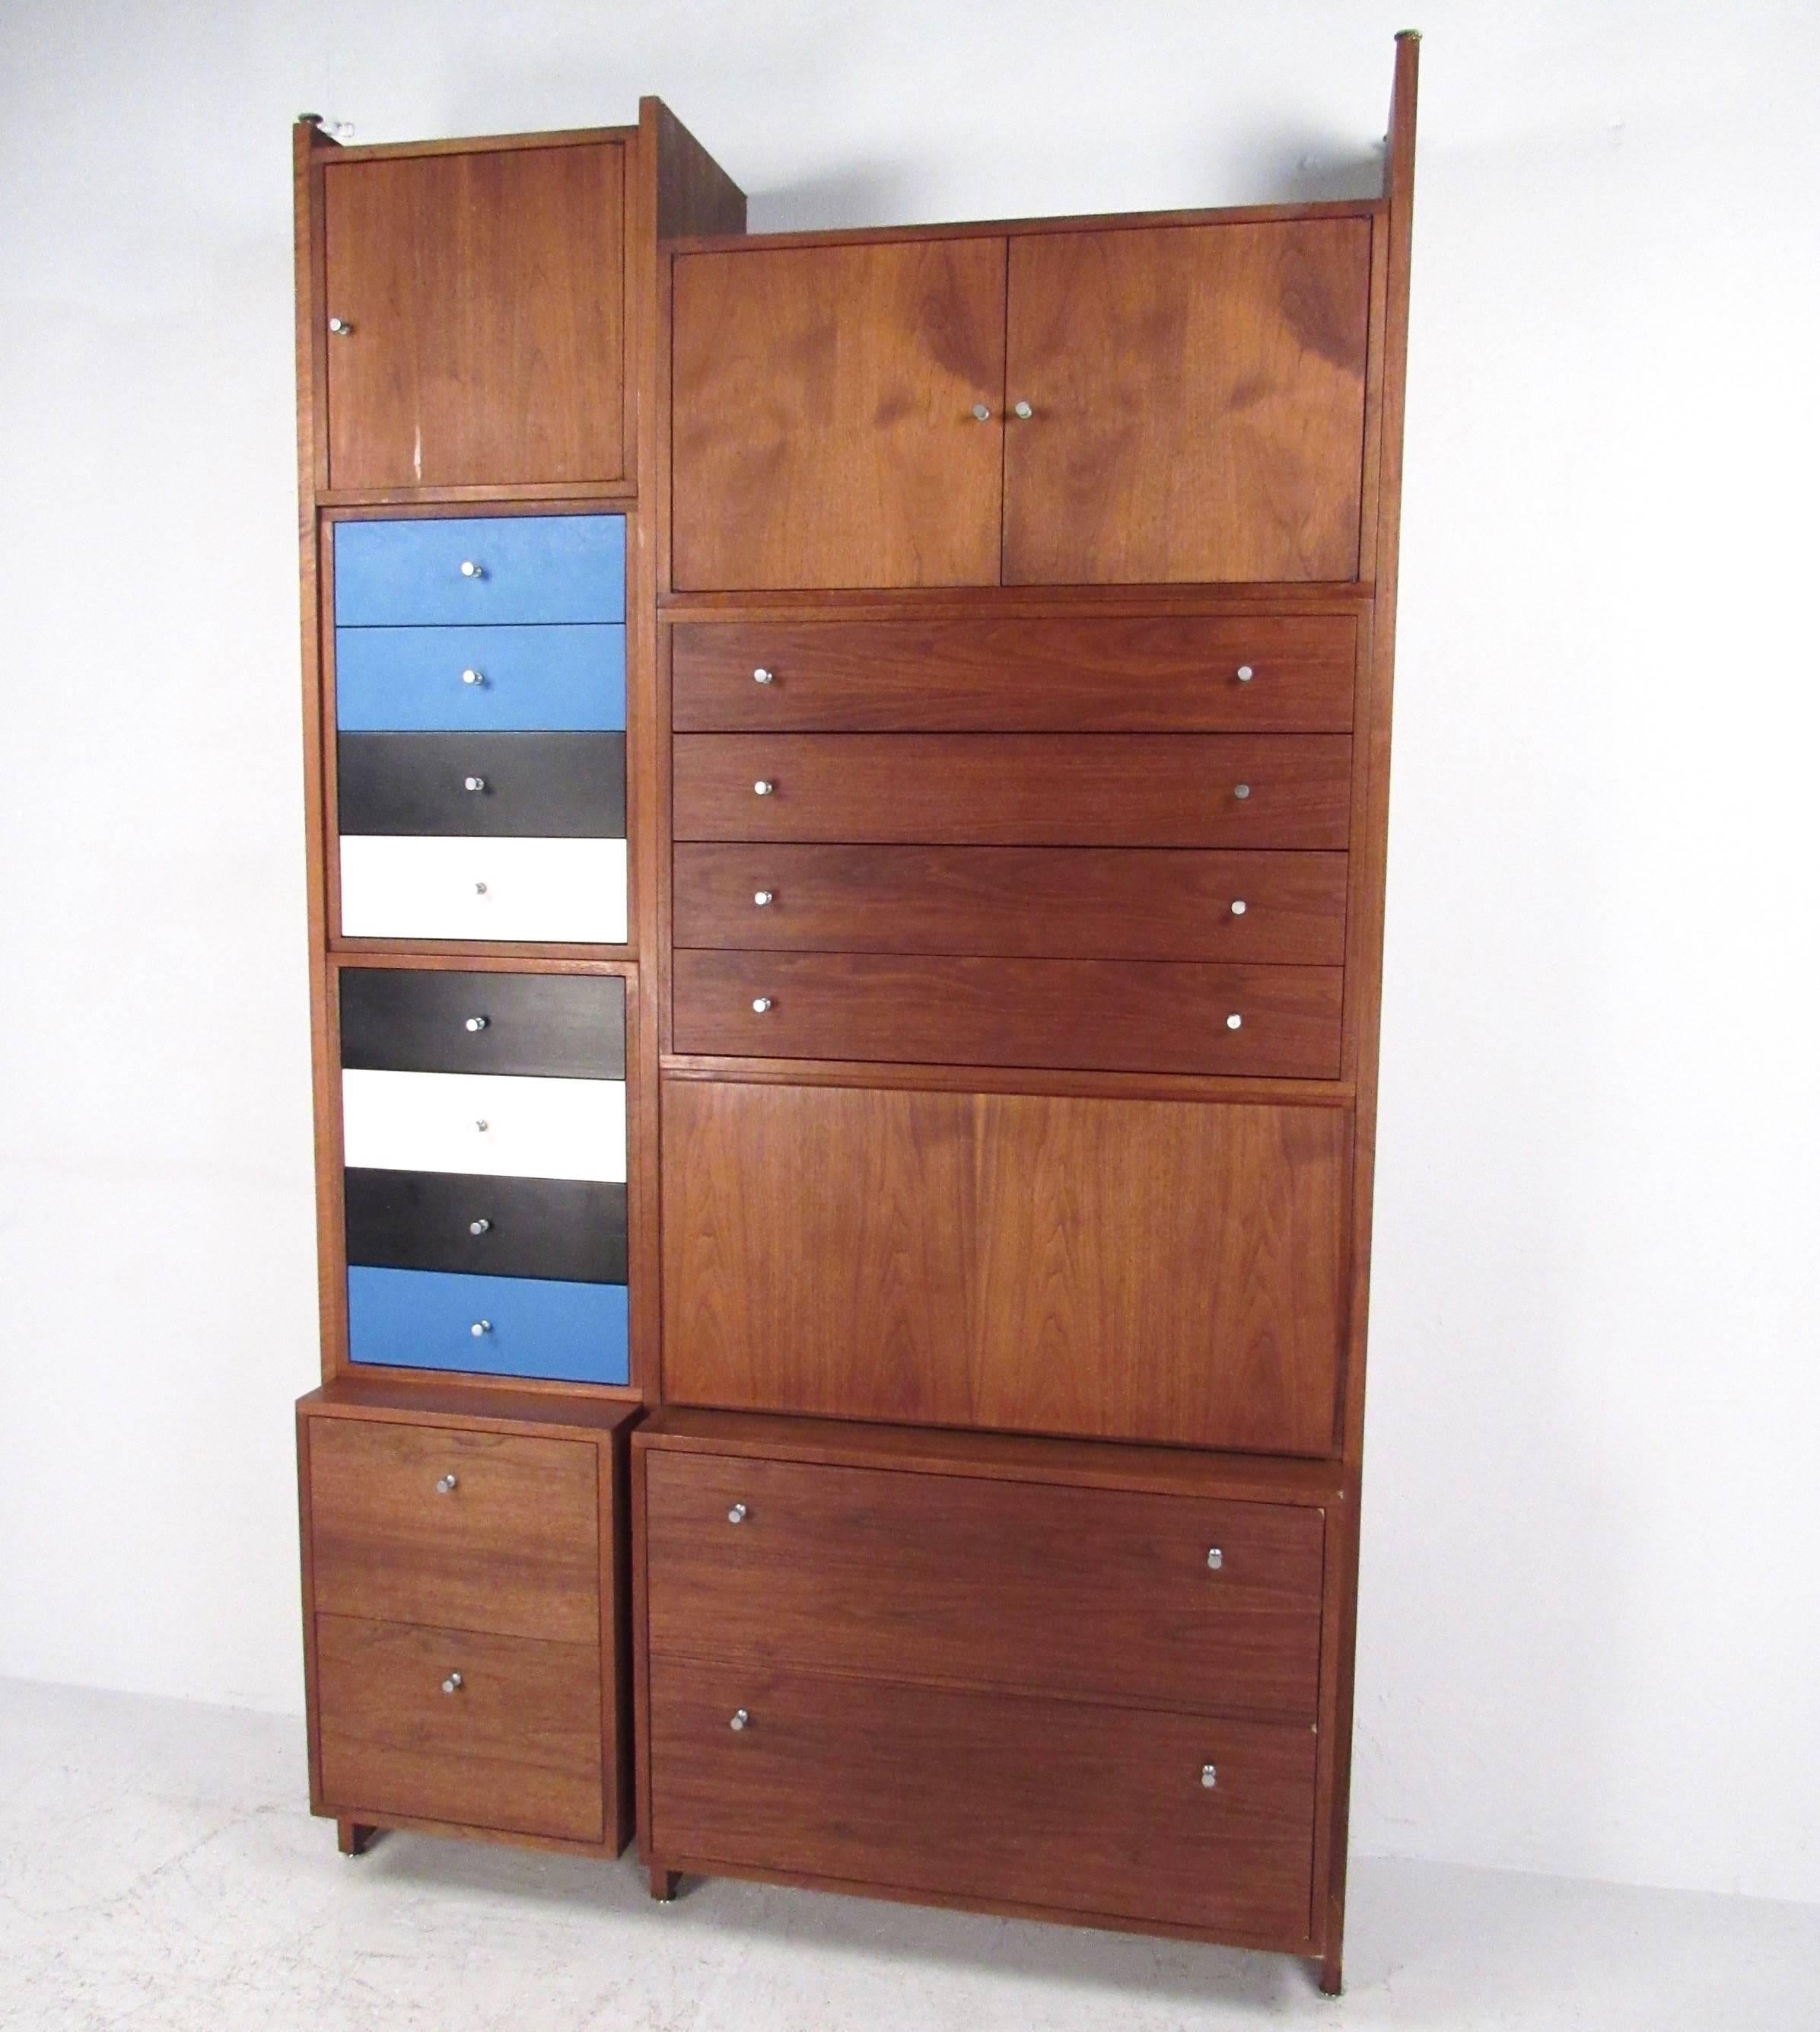 This large modular wall cabinet features a stunning array of storage options in a uniquely designed package. Numerous drawers and cabinets are matched with a drop front writing desk, all within this impressive eight foot high cabinet. Rich walnut